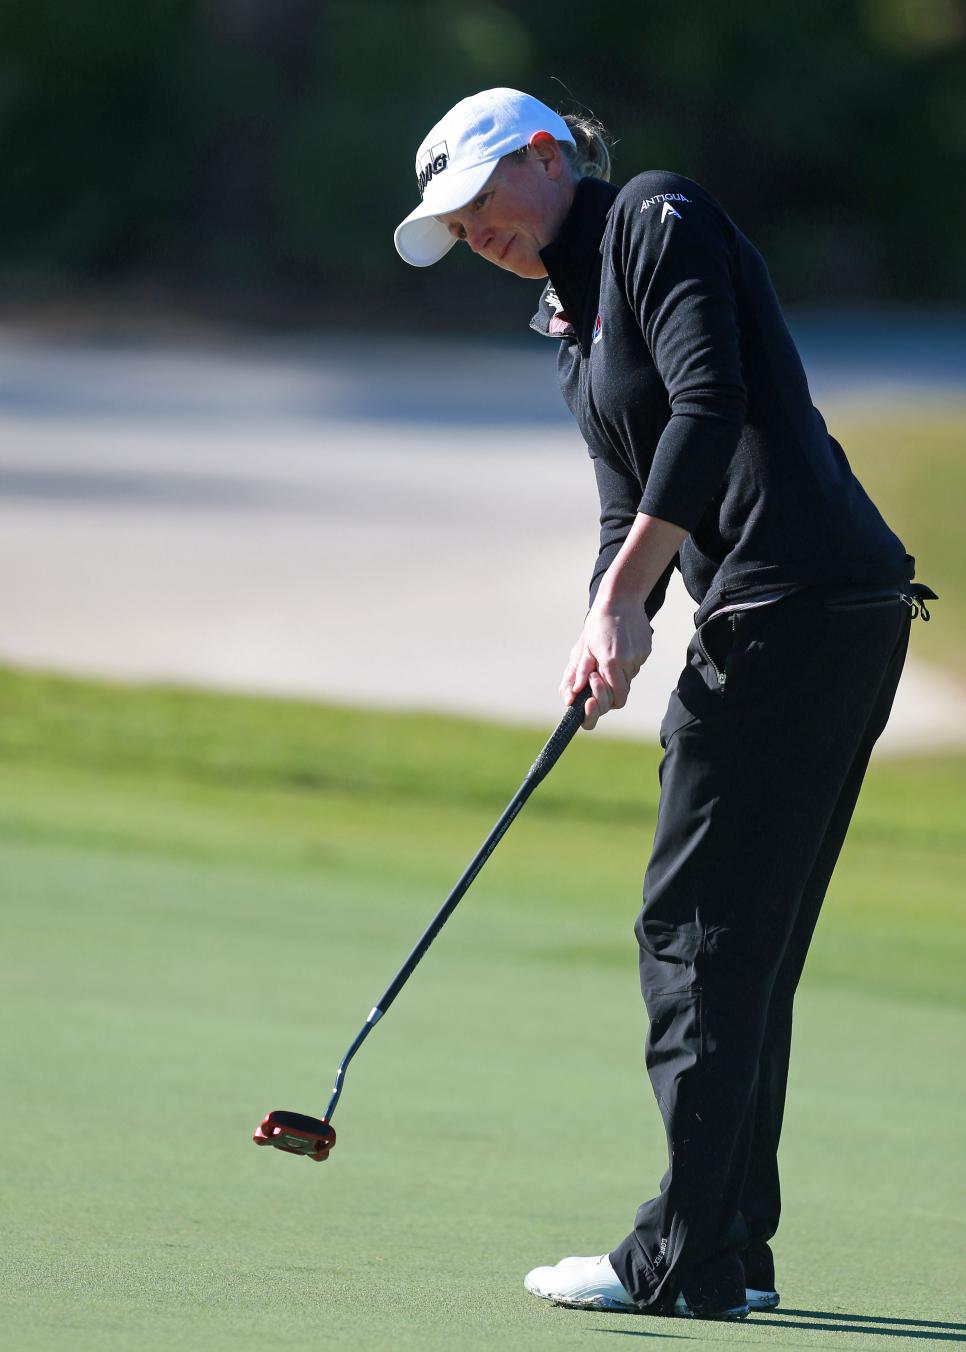 stacy-lewis-diamond-ranch-toc-2019-thursday-putting.jpg